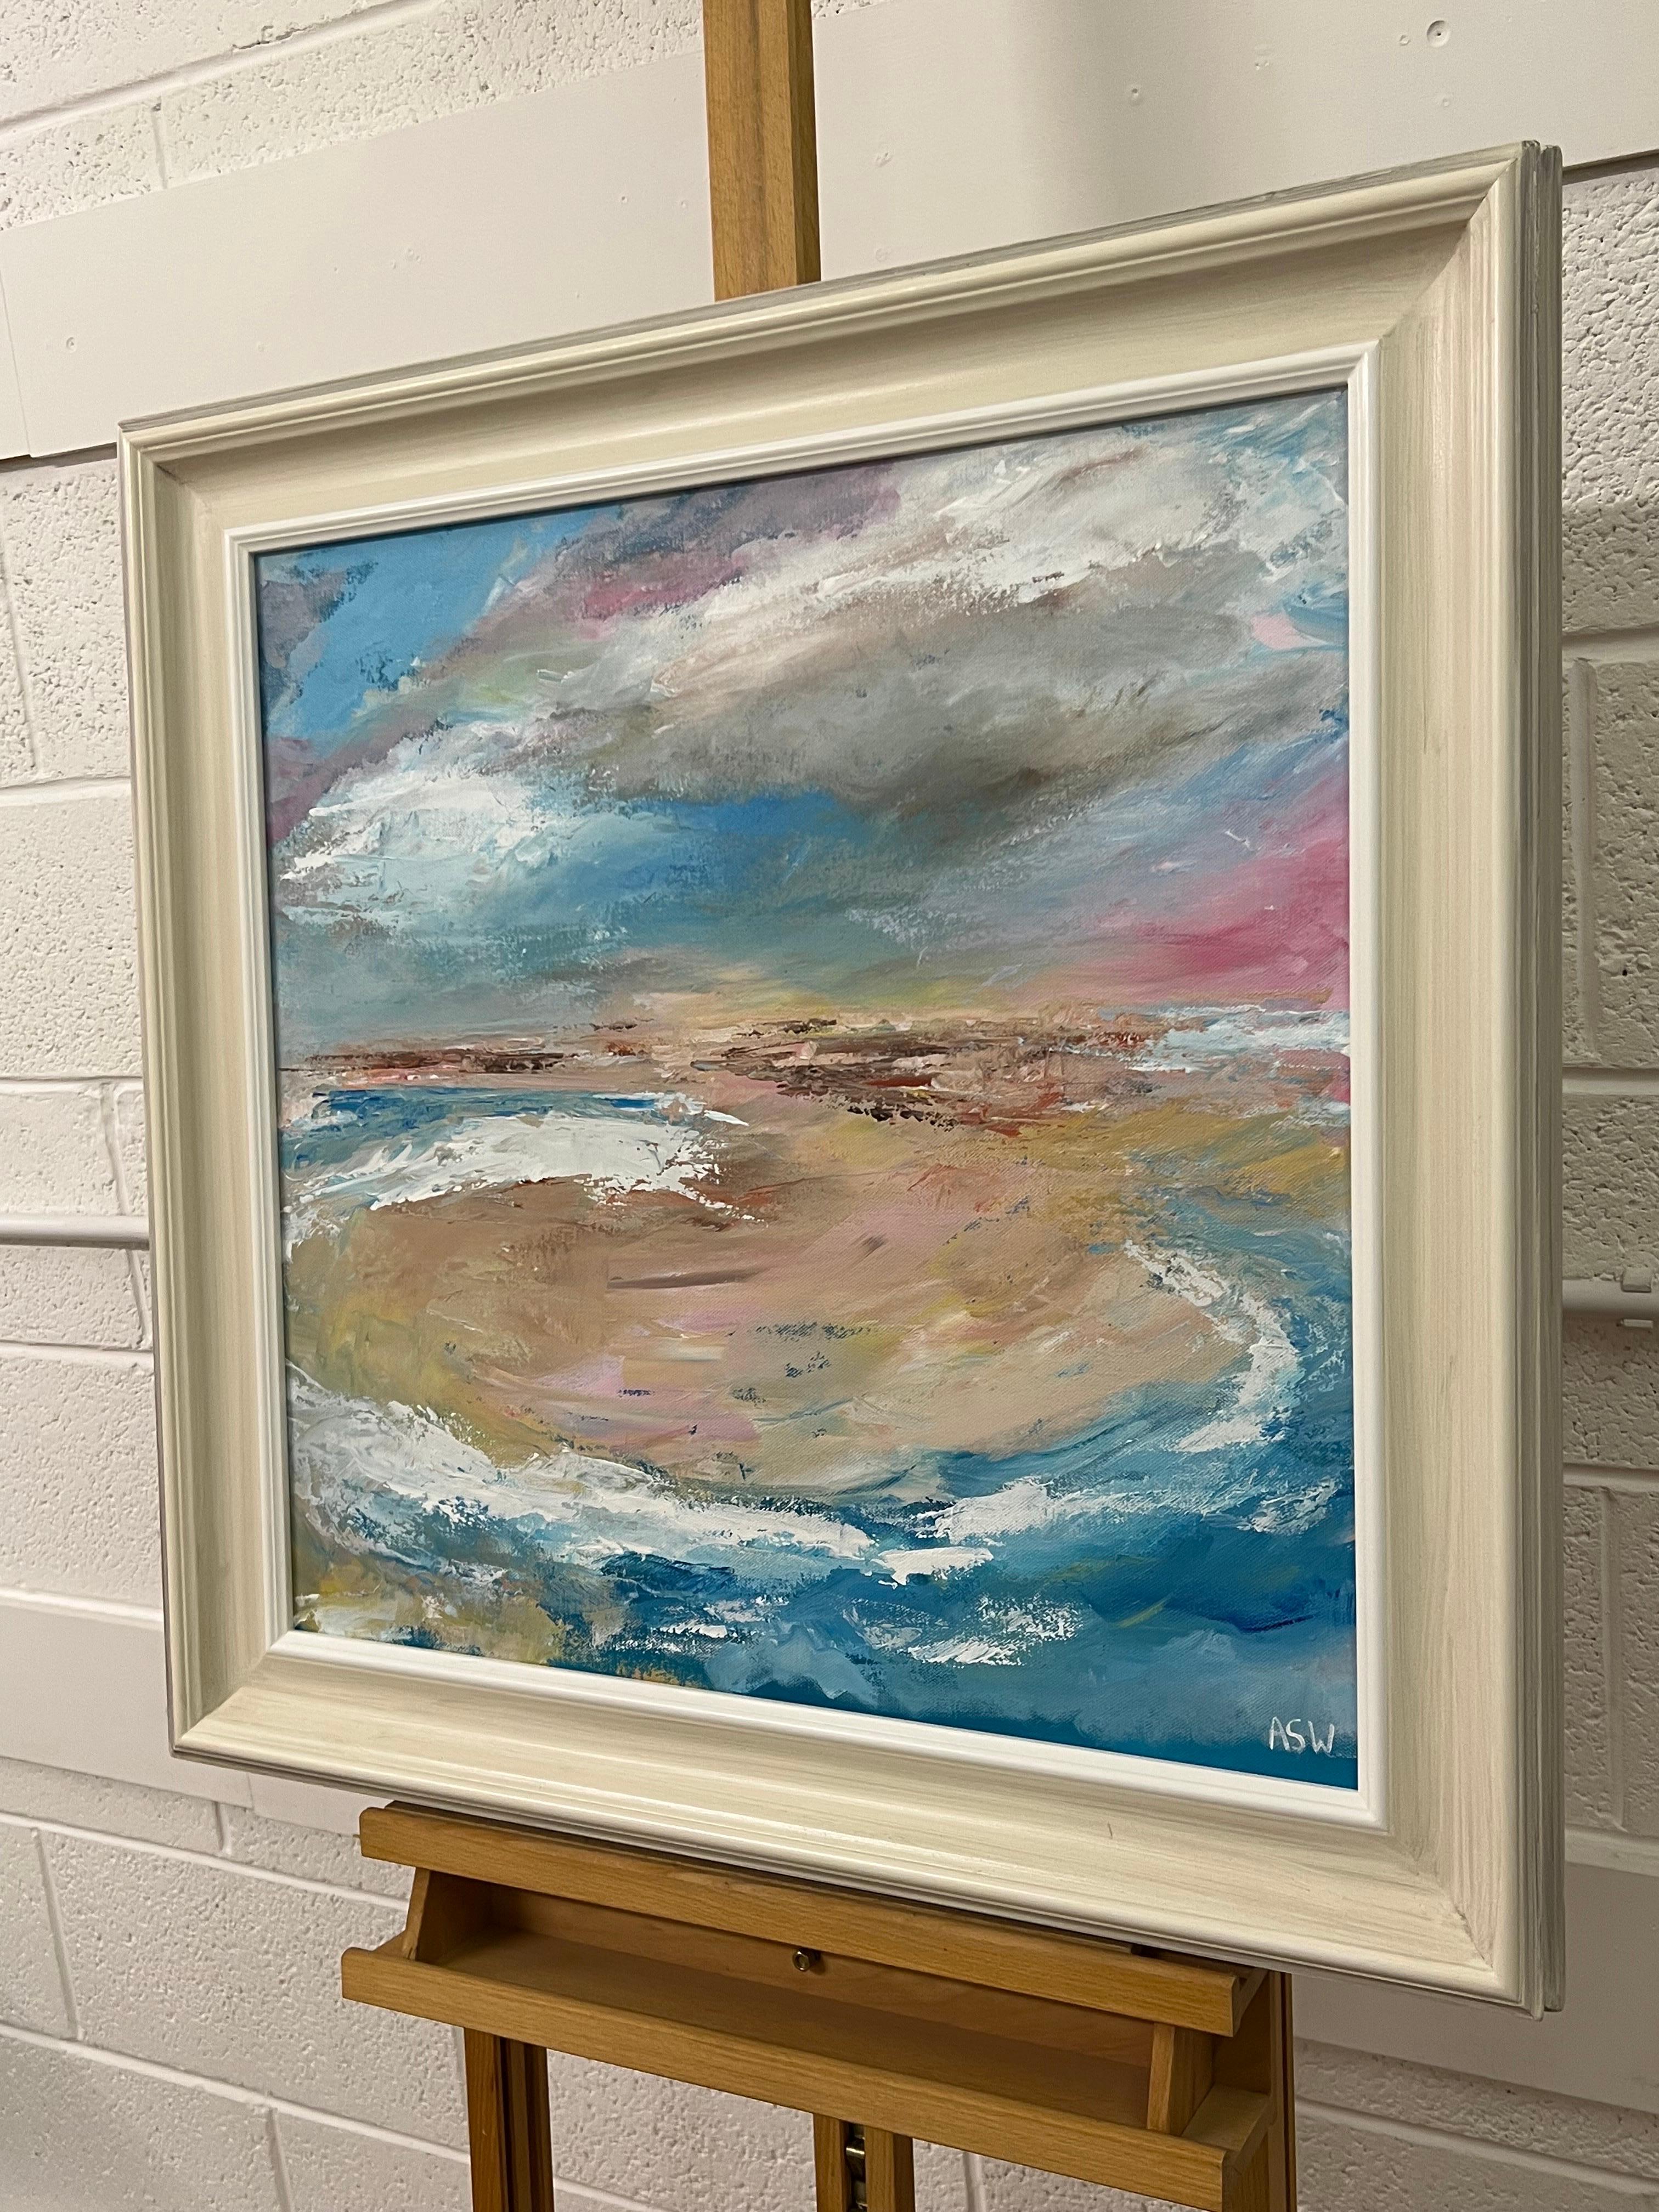 Colourful Abstract Impressionist Seascape Landscape by Contemporary British Artist, Angela Wakefield. This atmospheric painting depicts an imagined scene using vivid red, orange, yellow and blue colours. This unique original forms part of a new body